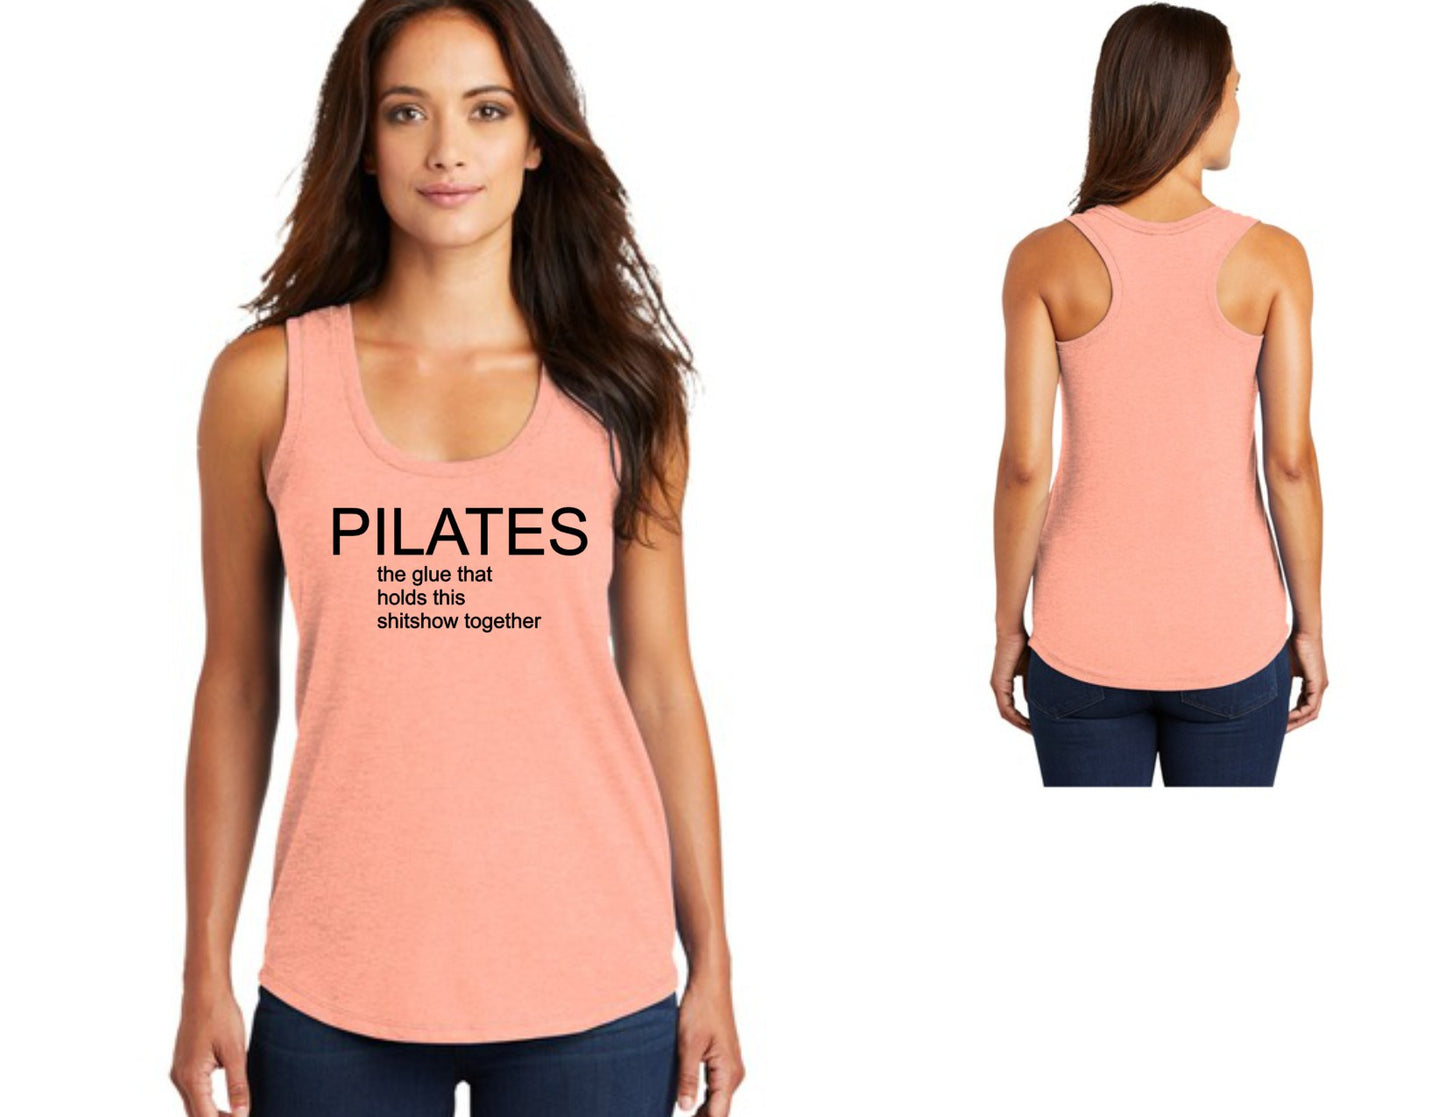 Pilates: the glue that holds the shitshow together tank